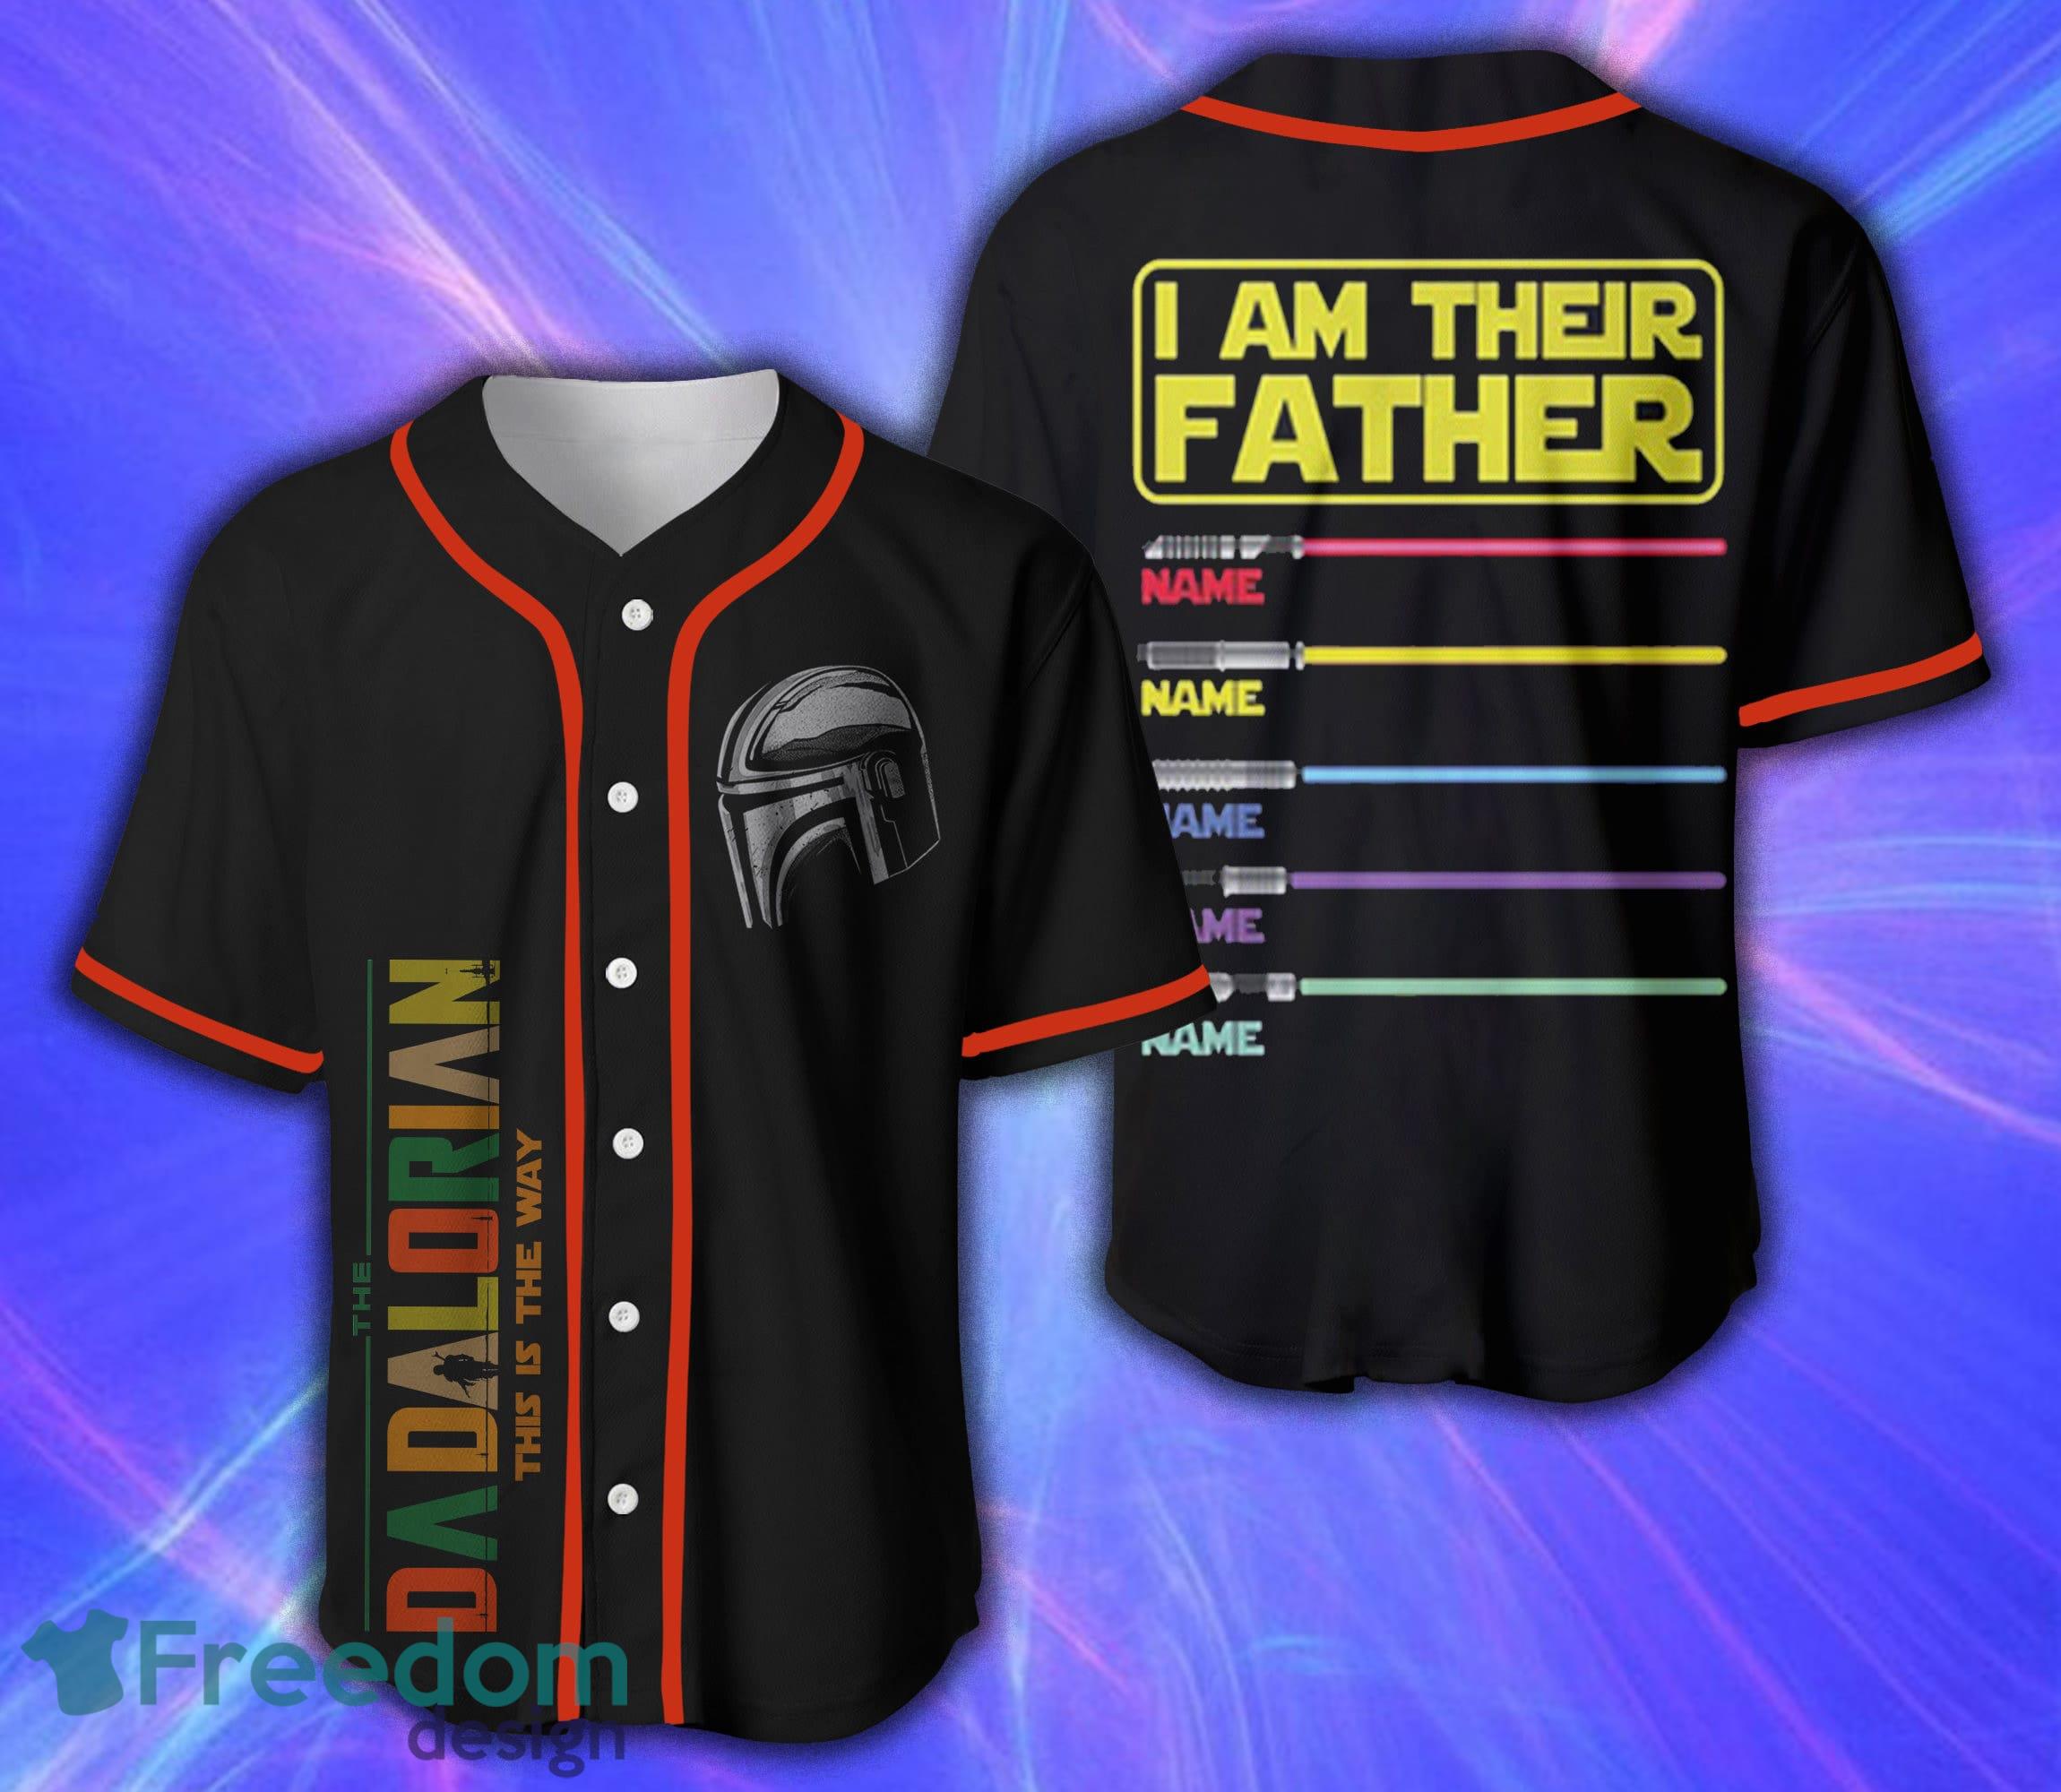 I Am Their Father Baseball Jersey Style 5 Shirt Gift For Men And Women -  Freedomdesign